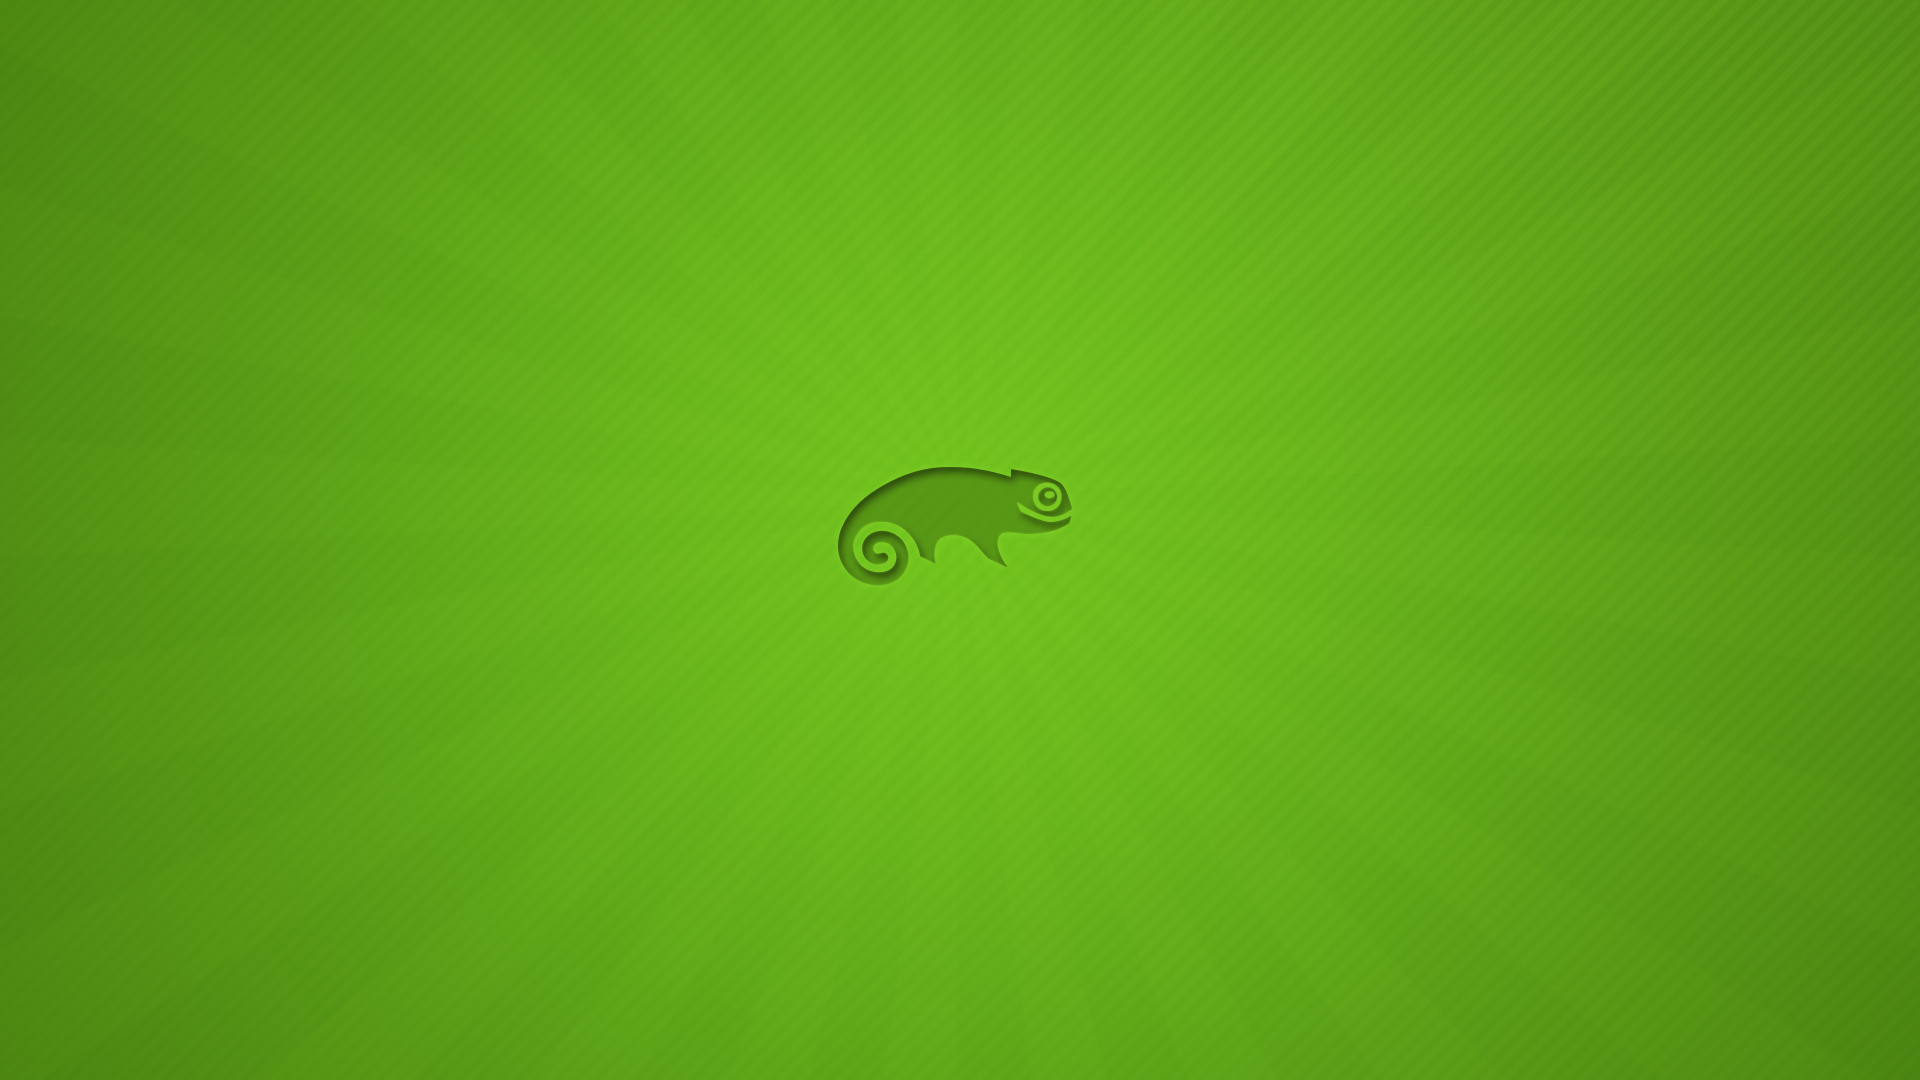 openSuse Wallpaper by anupespe on DeviantArt